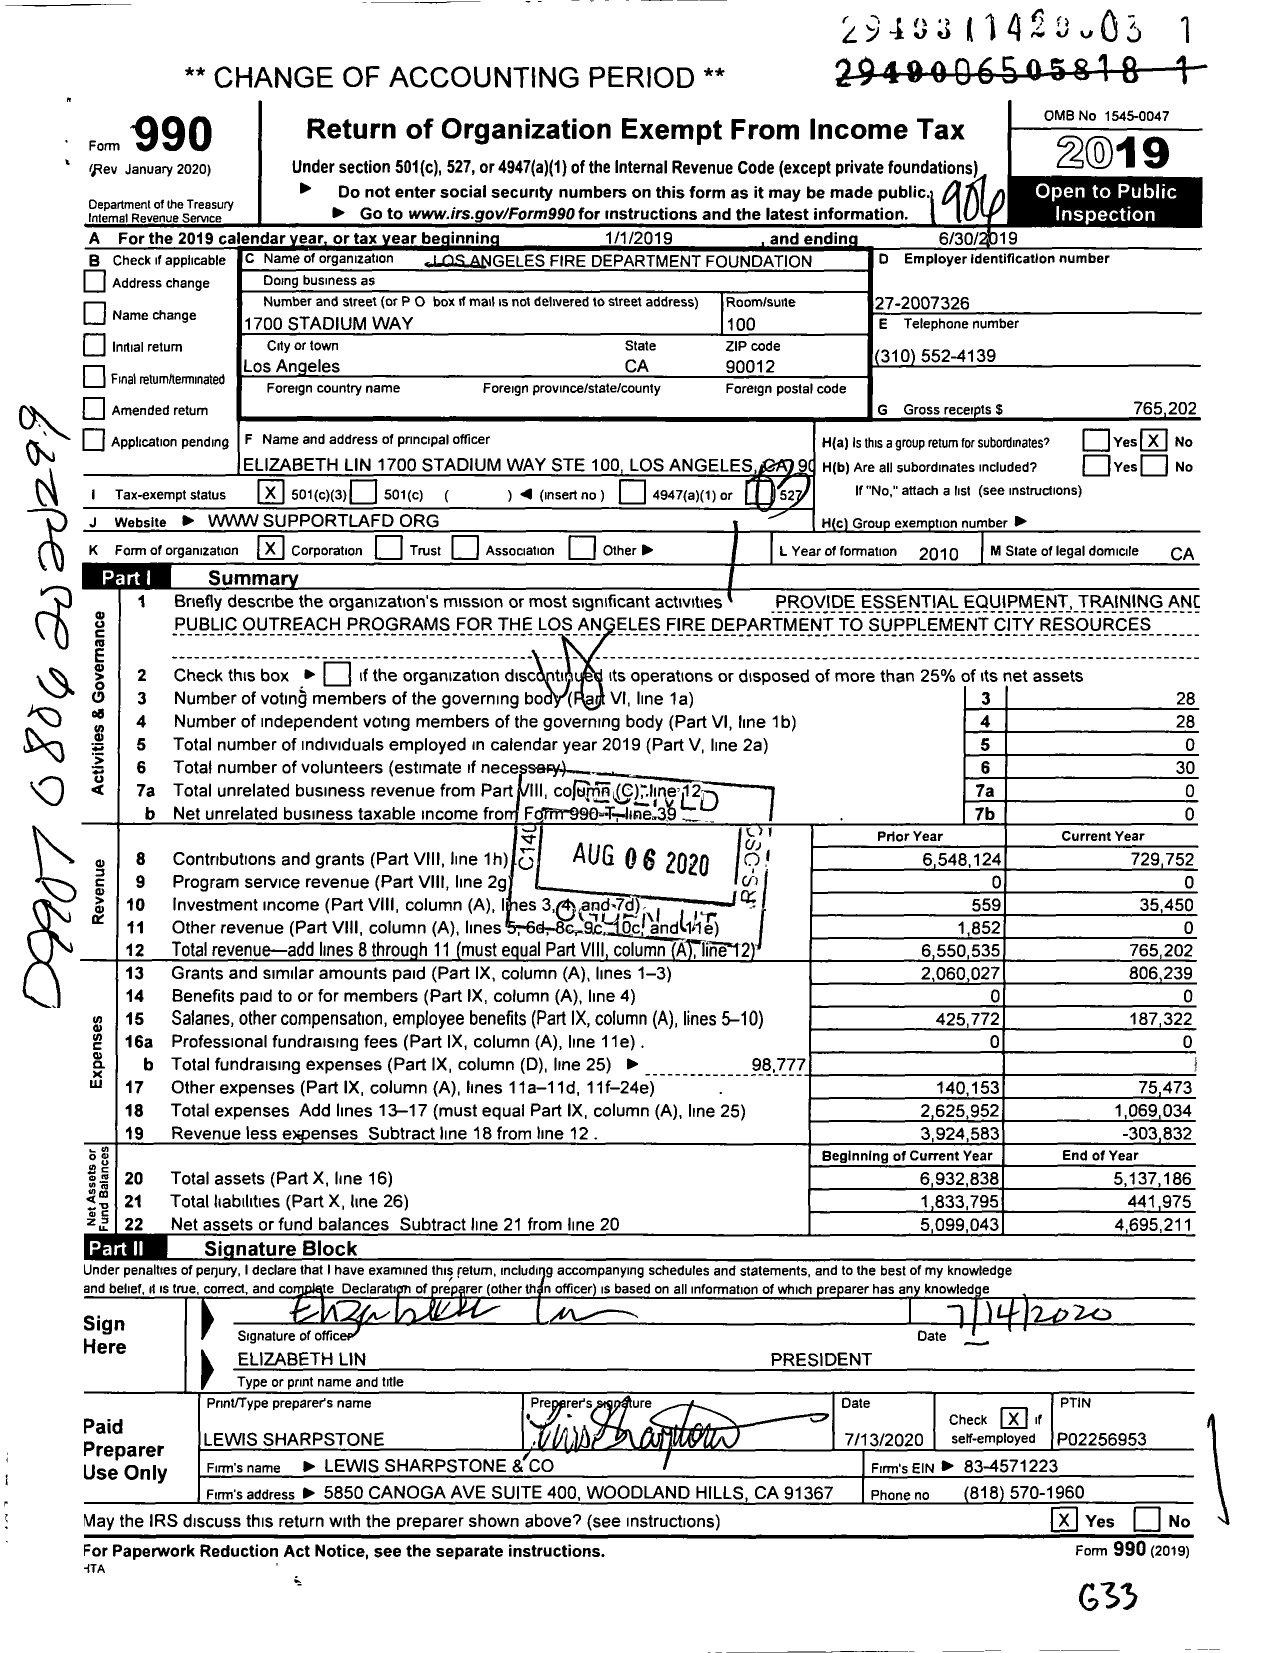 Image of first page of 2018 Form 990 for Los Angeles Fire Department Foundation